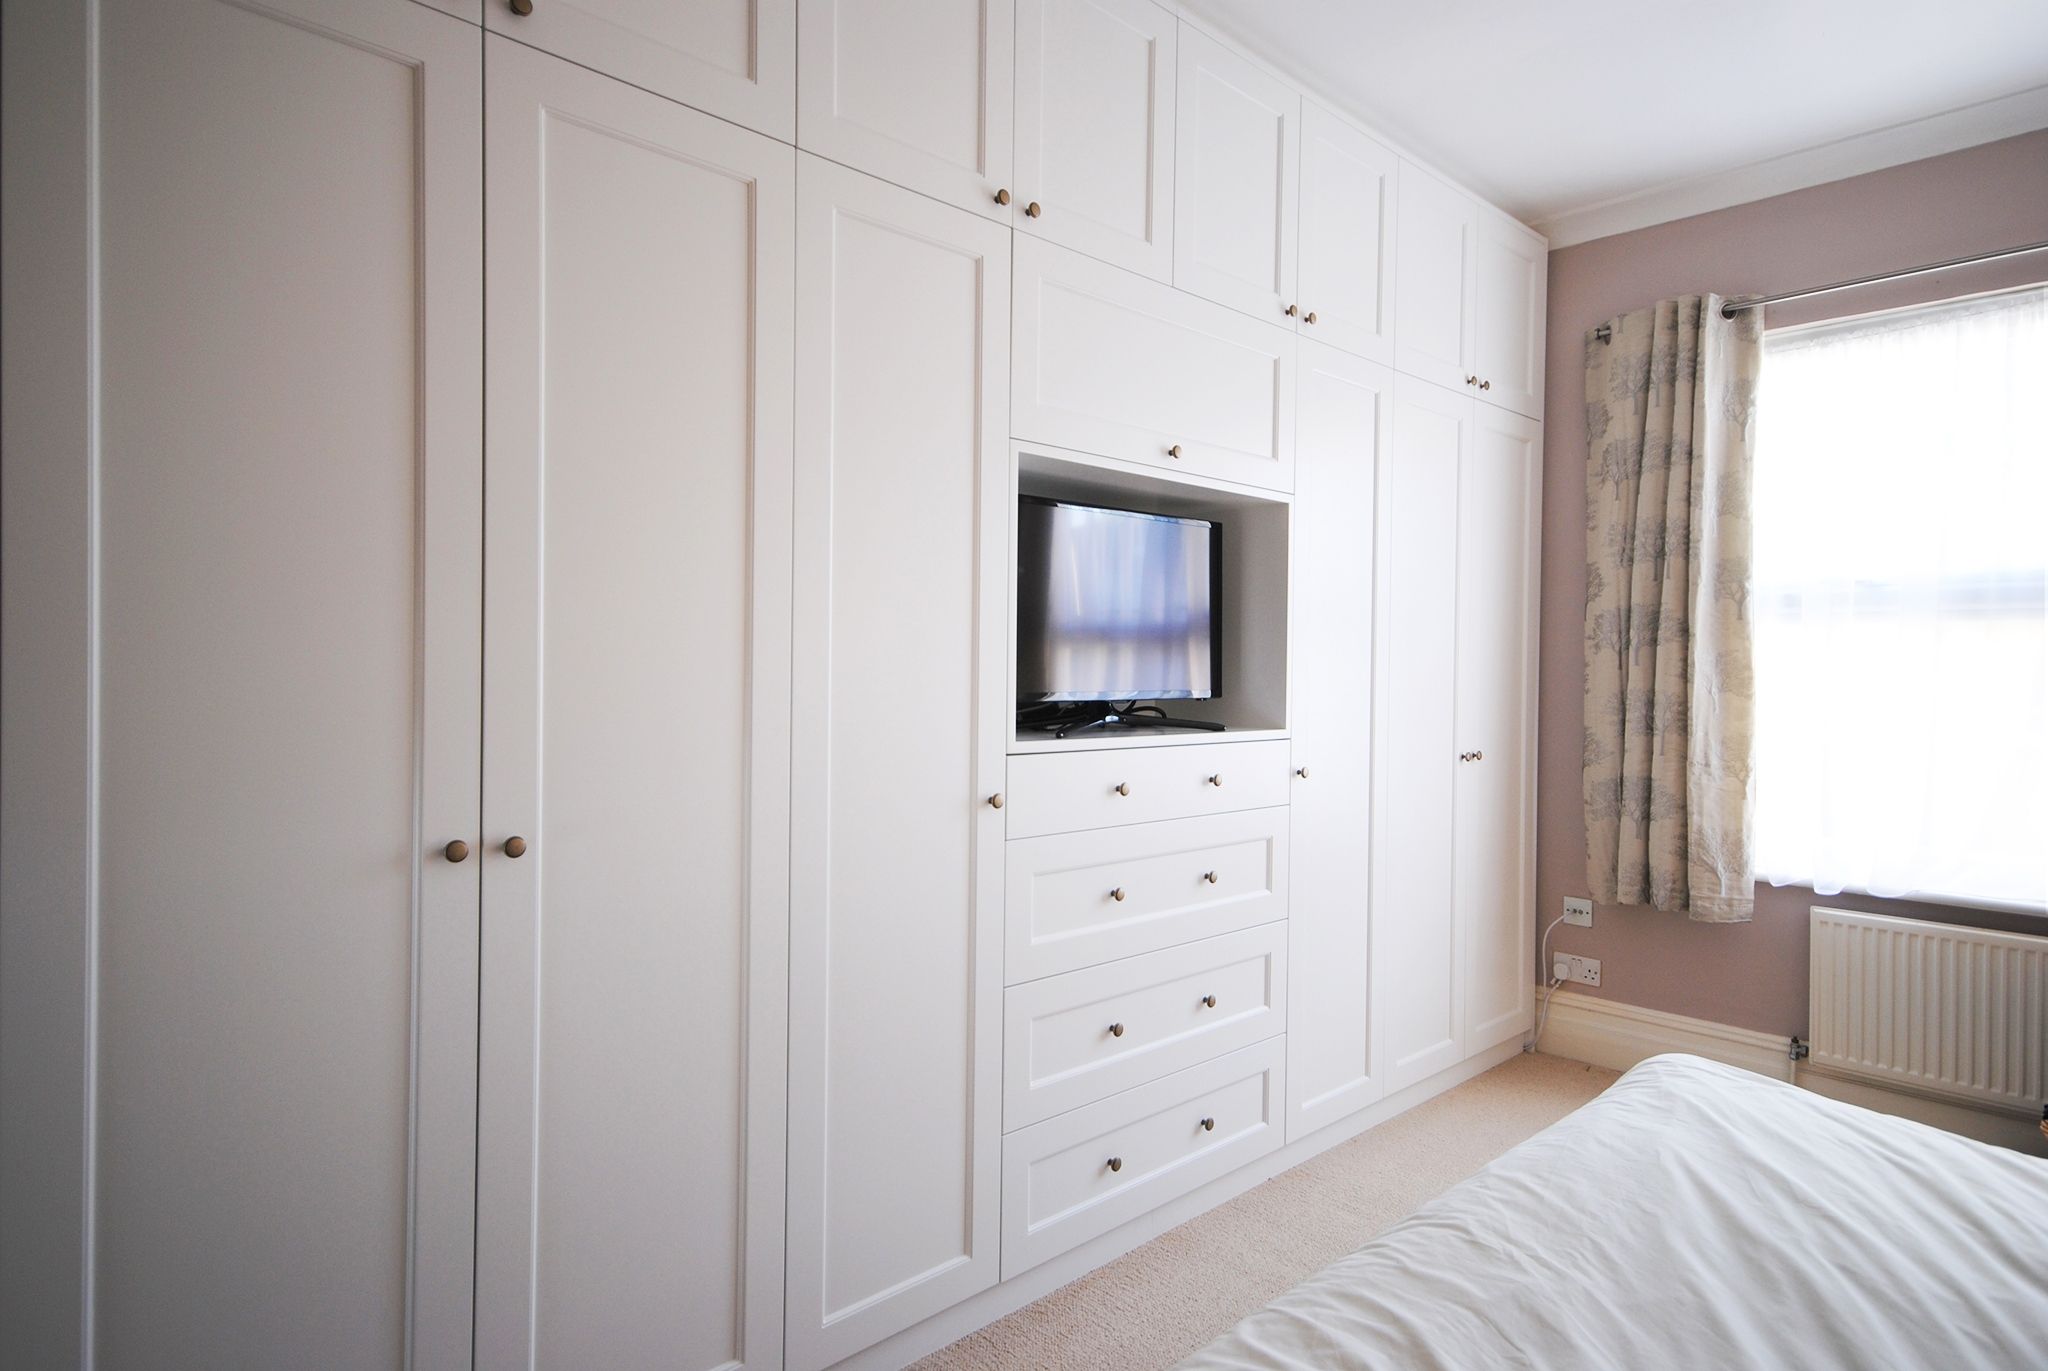 Creative Woodwork Combined A Tv Unit And Wardrobe To Make This Intended For Built In Wardrobes With Tv Space (View 14 of 15)